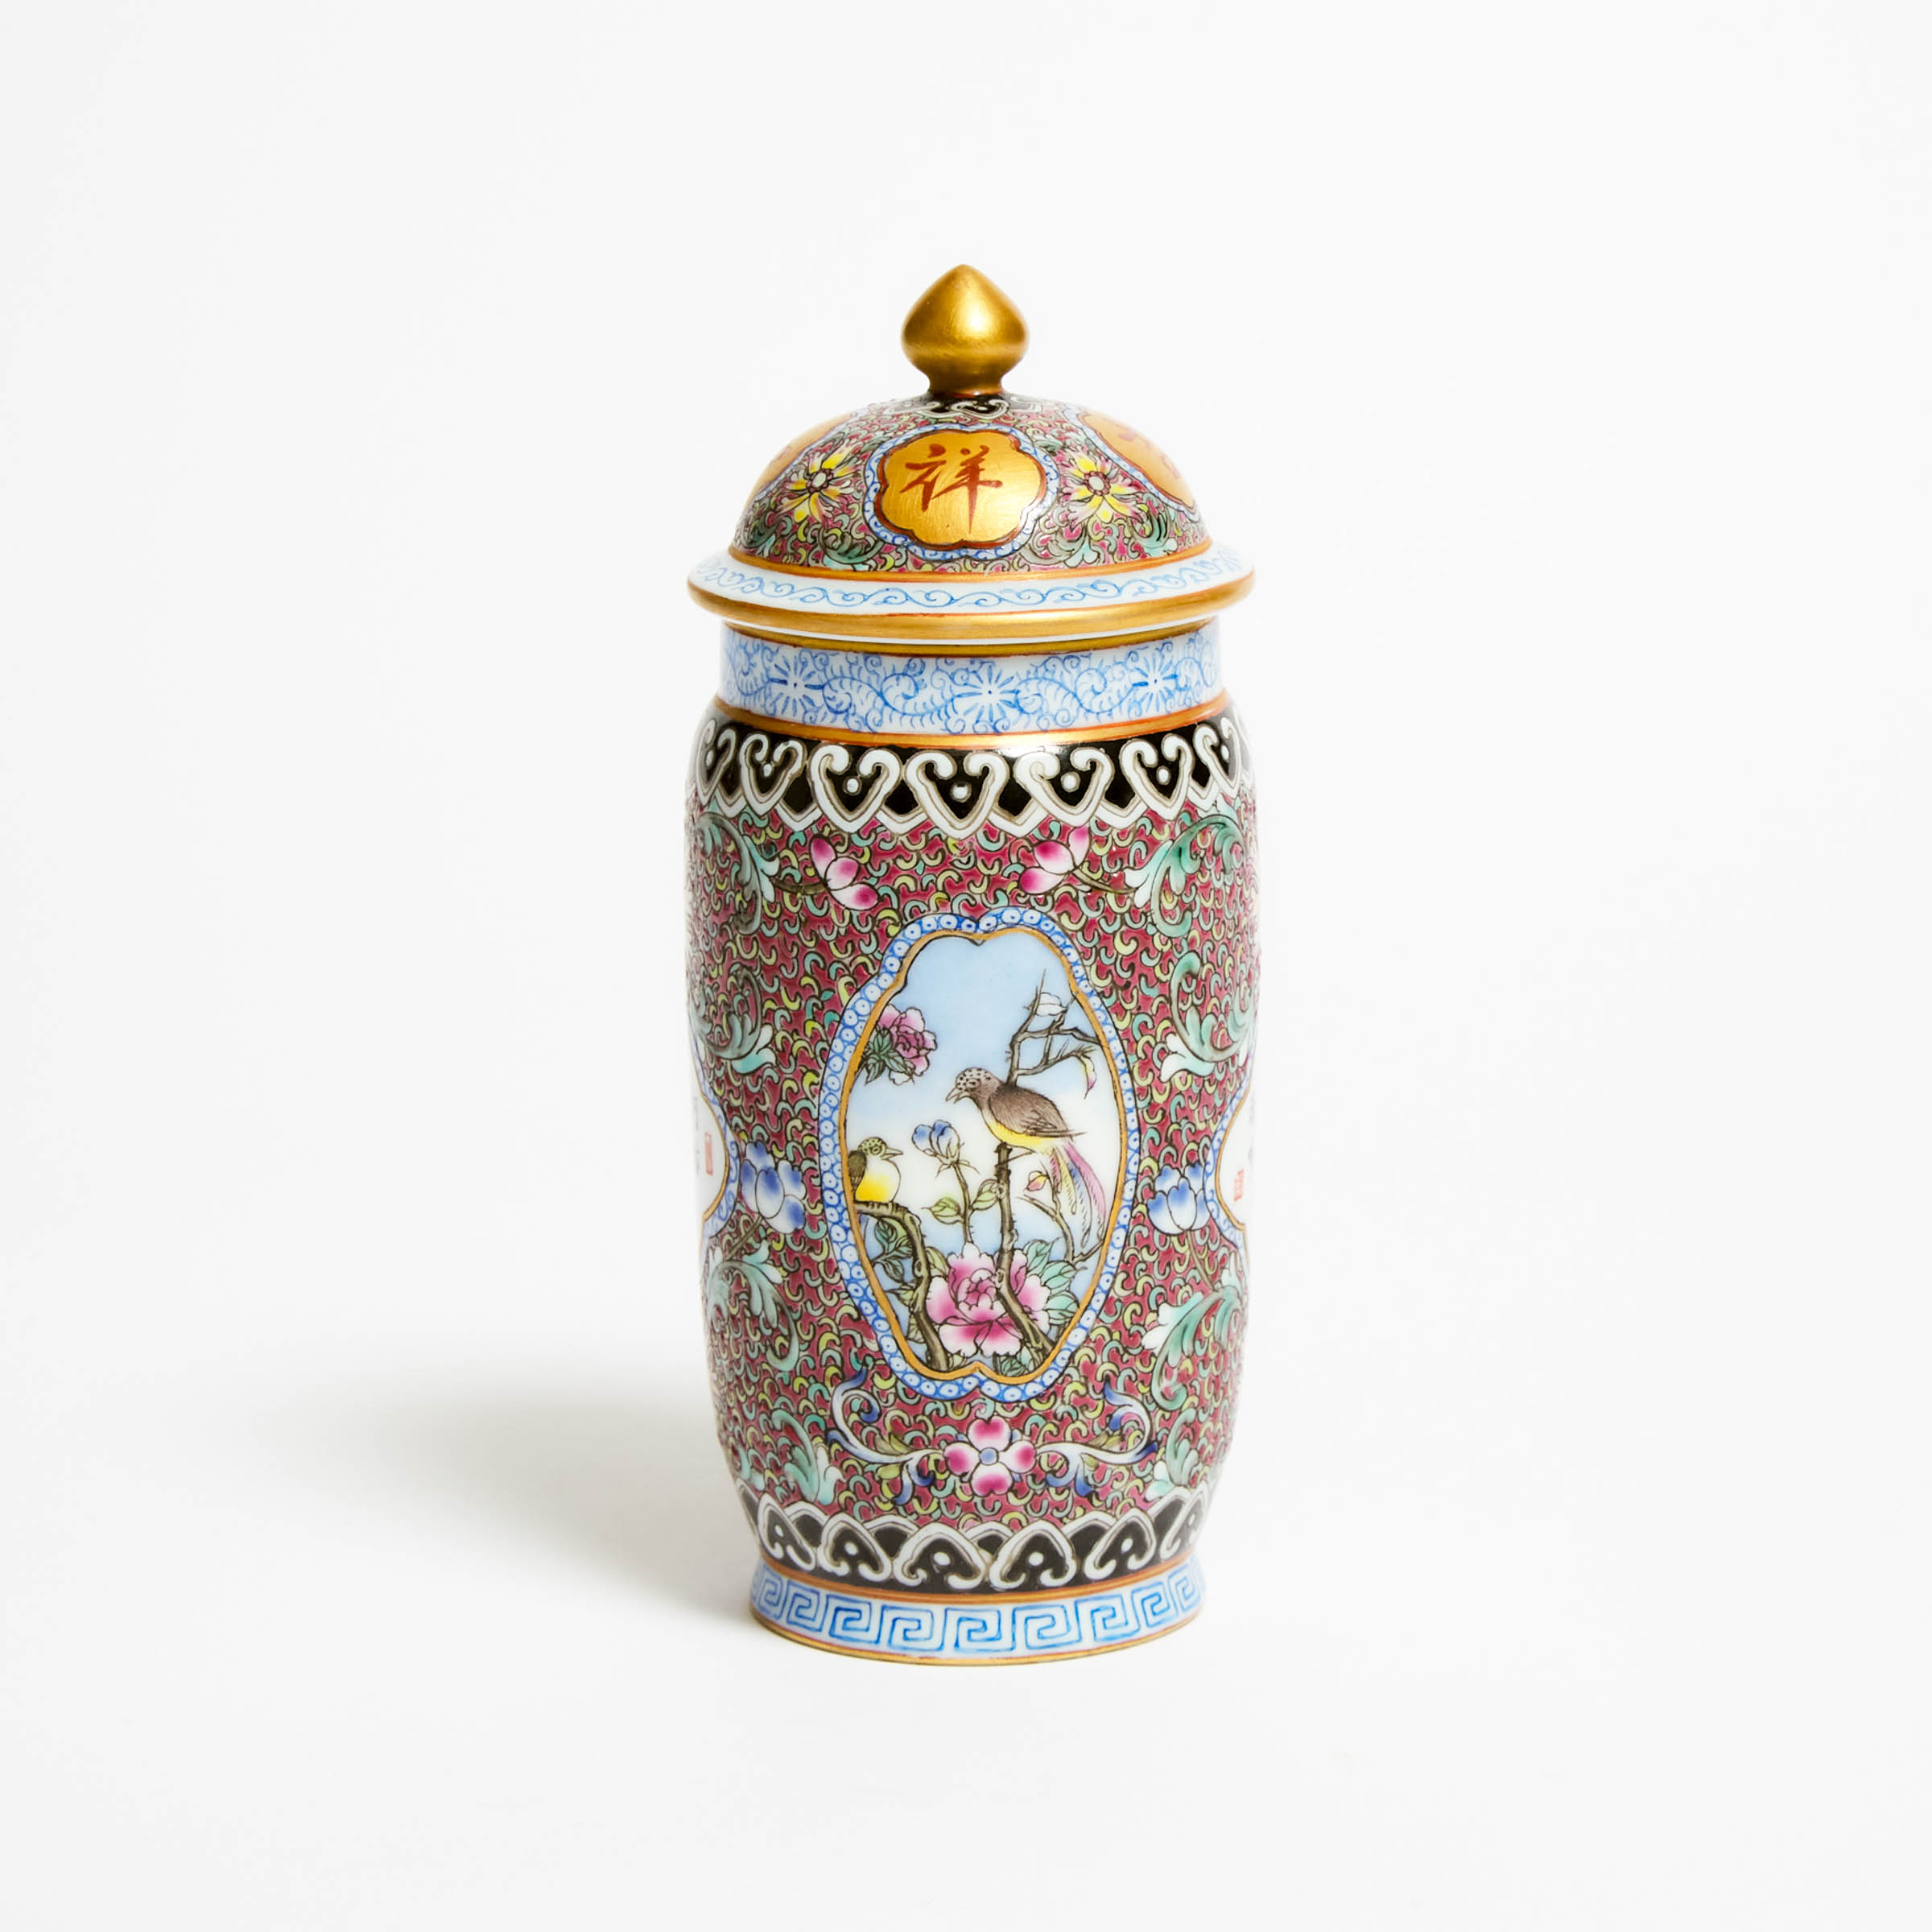 A Gilt Decorated Famille Rose Lantern 2f2c7d